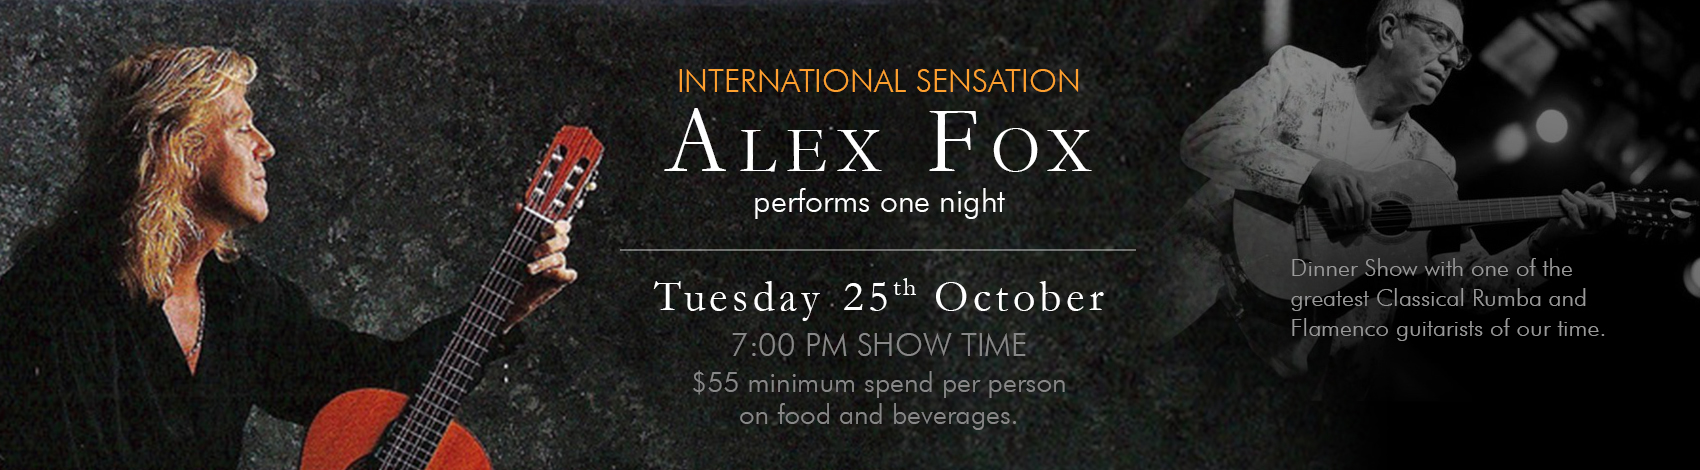 International Sensation Alex Fox performs one night Tuesday 25th October 7:00 PM Show Time $55 minimum spend per person  on food and beverages.